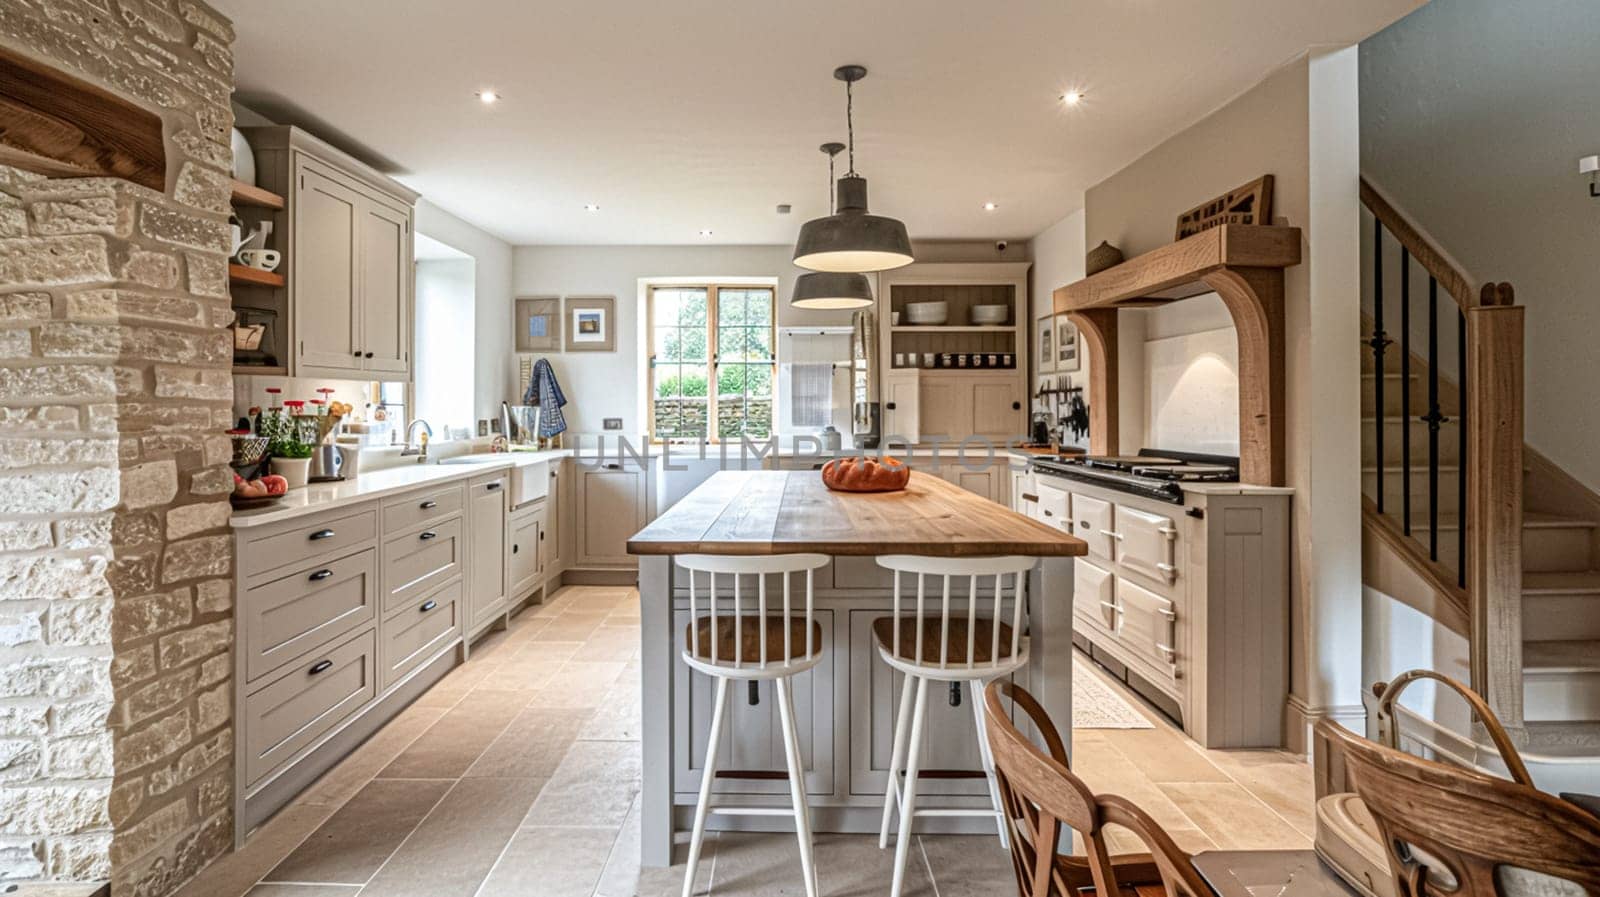 Cotswolds cottage style kitchen decor, interior design and country house, in frame kitchen cabinetry, sink, stove and countertop, English countryside styling by Anneleven